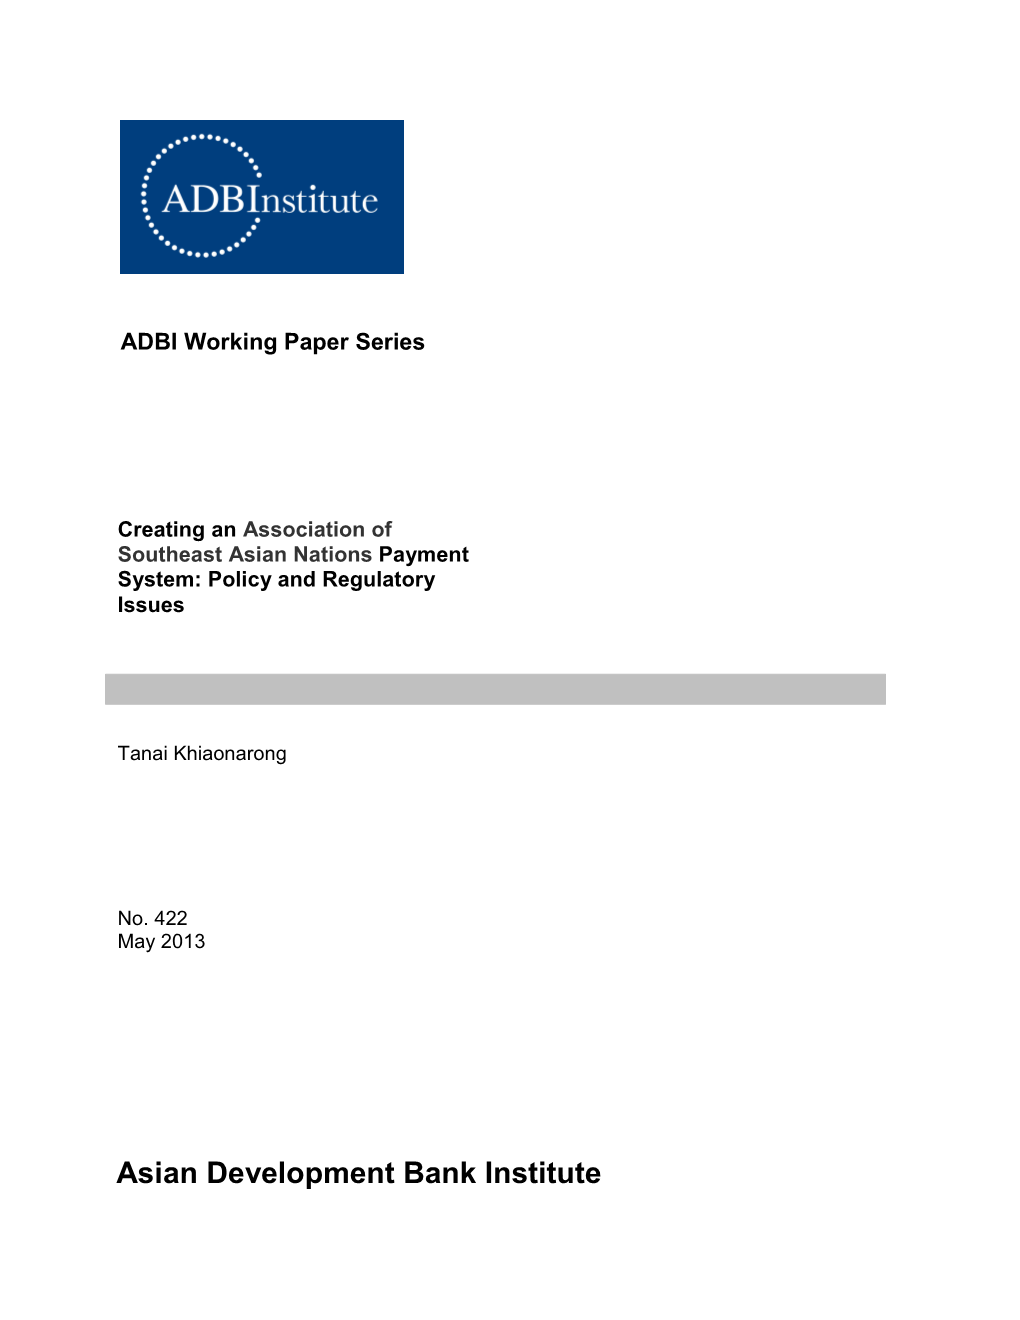 Creating an Association of Southeast Asian Nations Payment System: Policy and Regulatory Issues